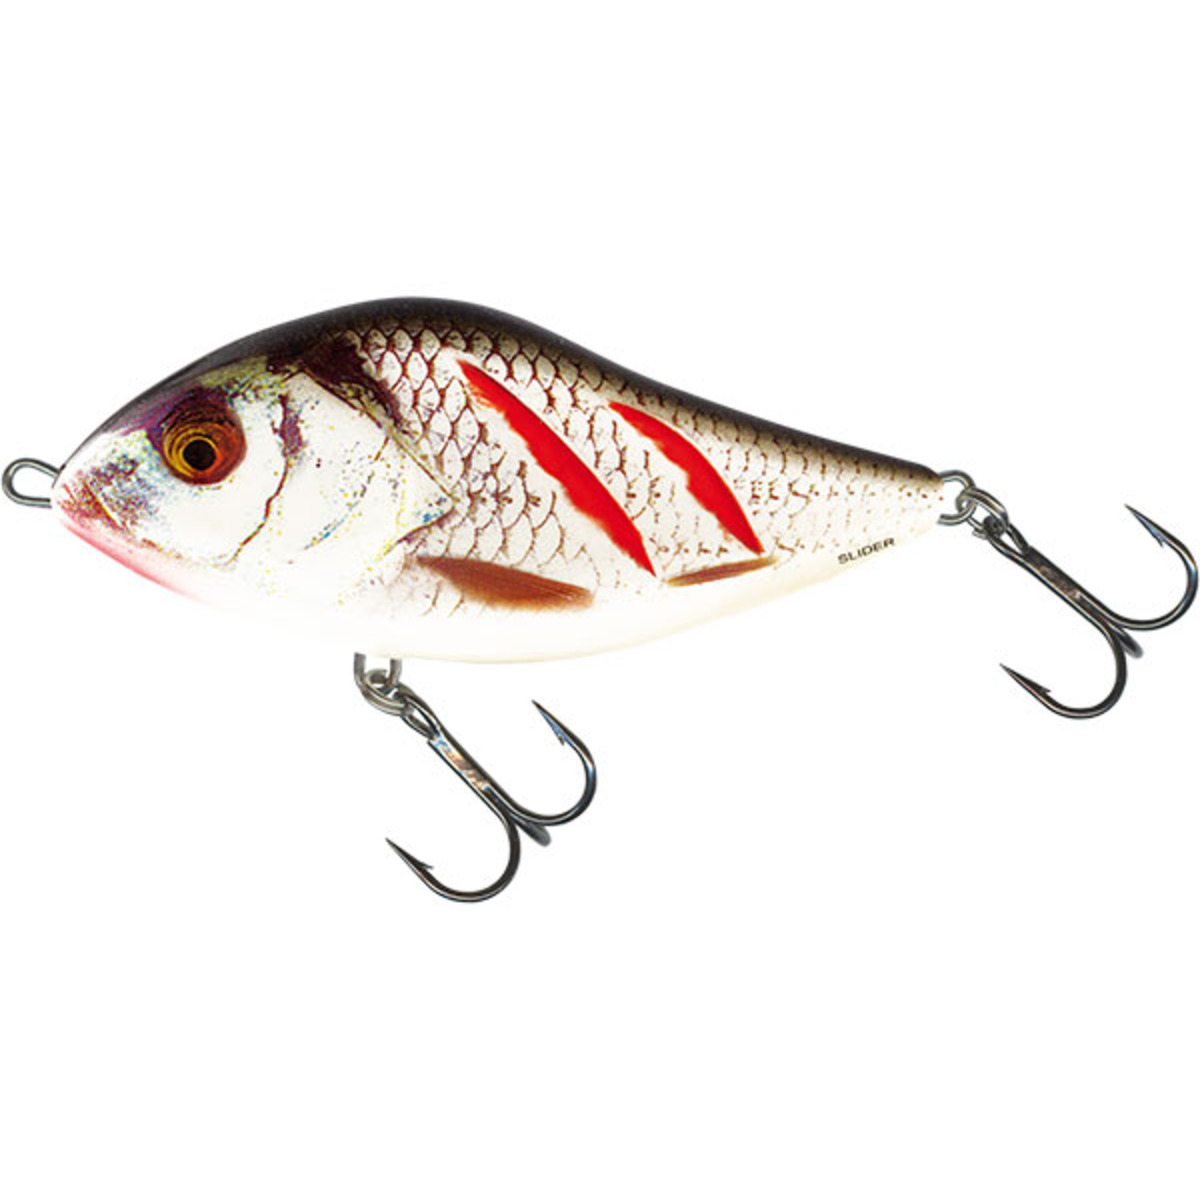 Salmo Slider Sinking - 12 Cm - Wounded Real Grey Shiner